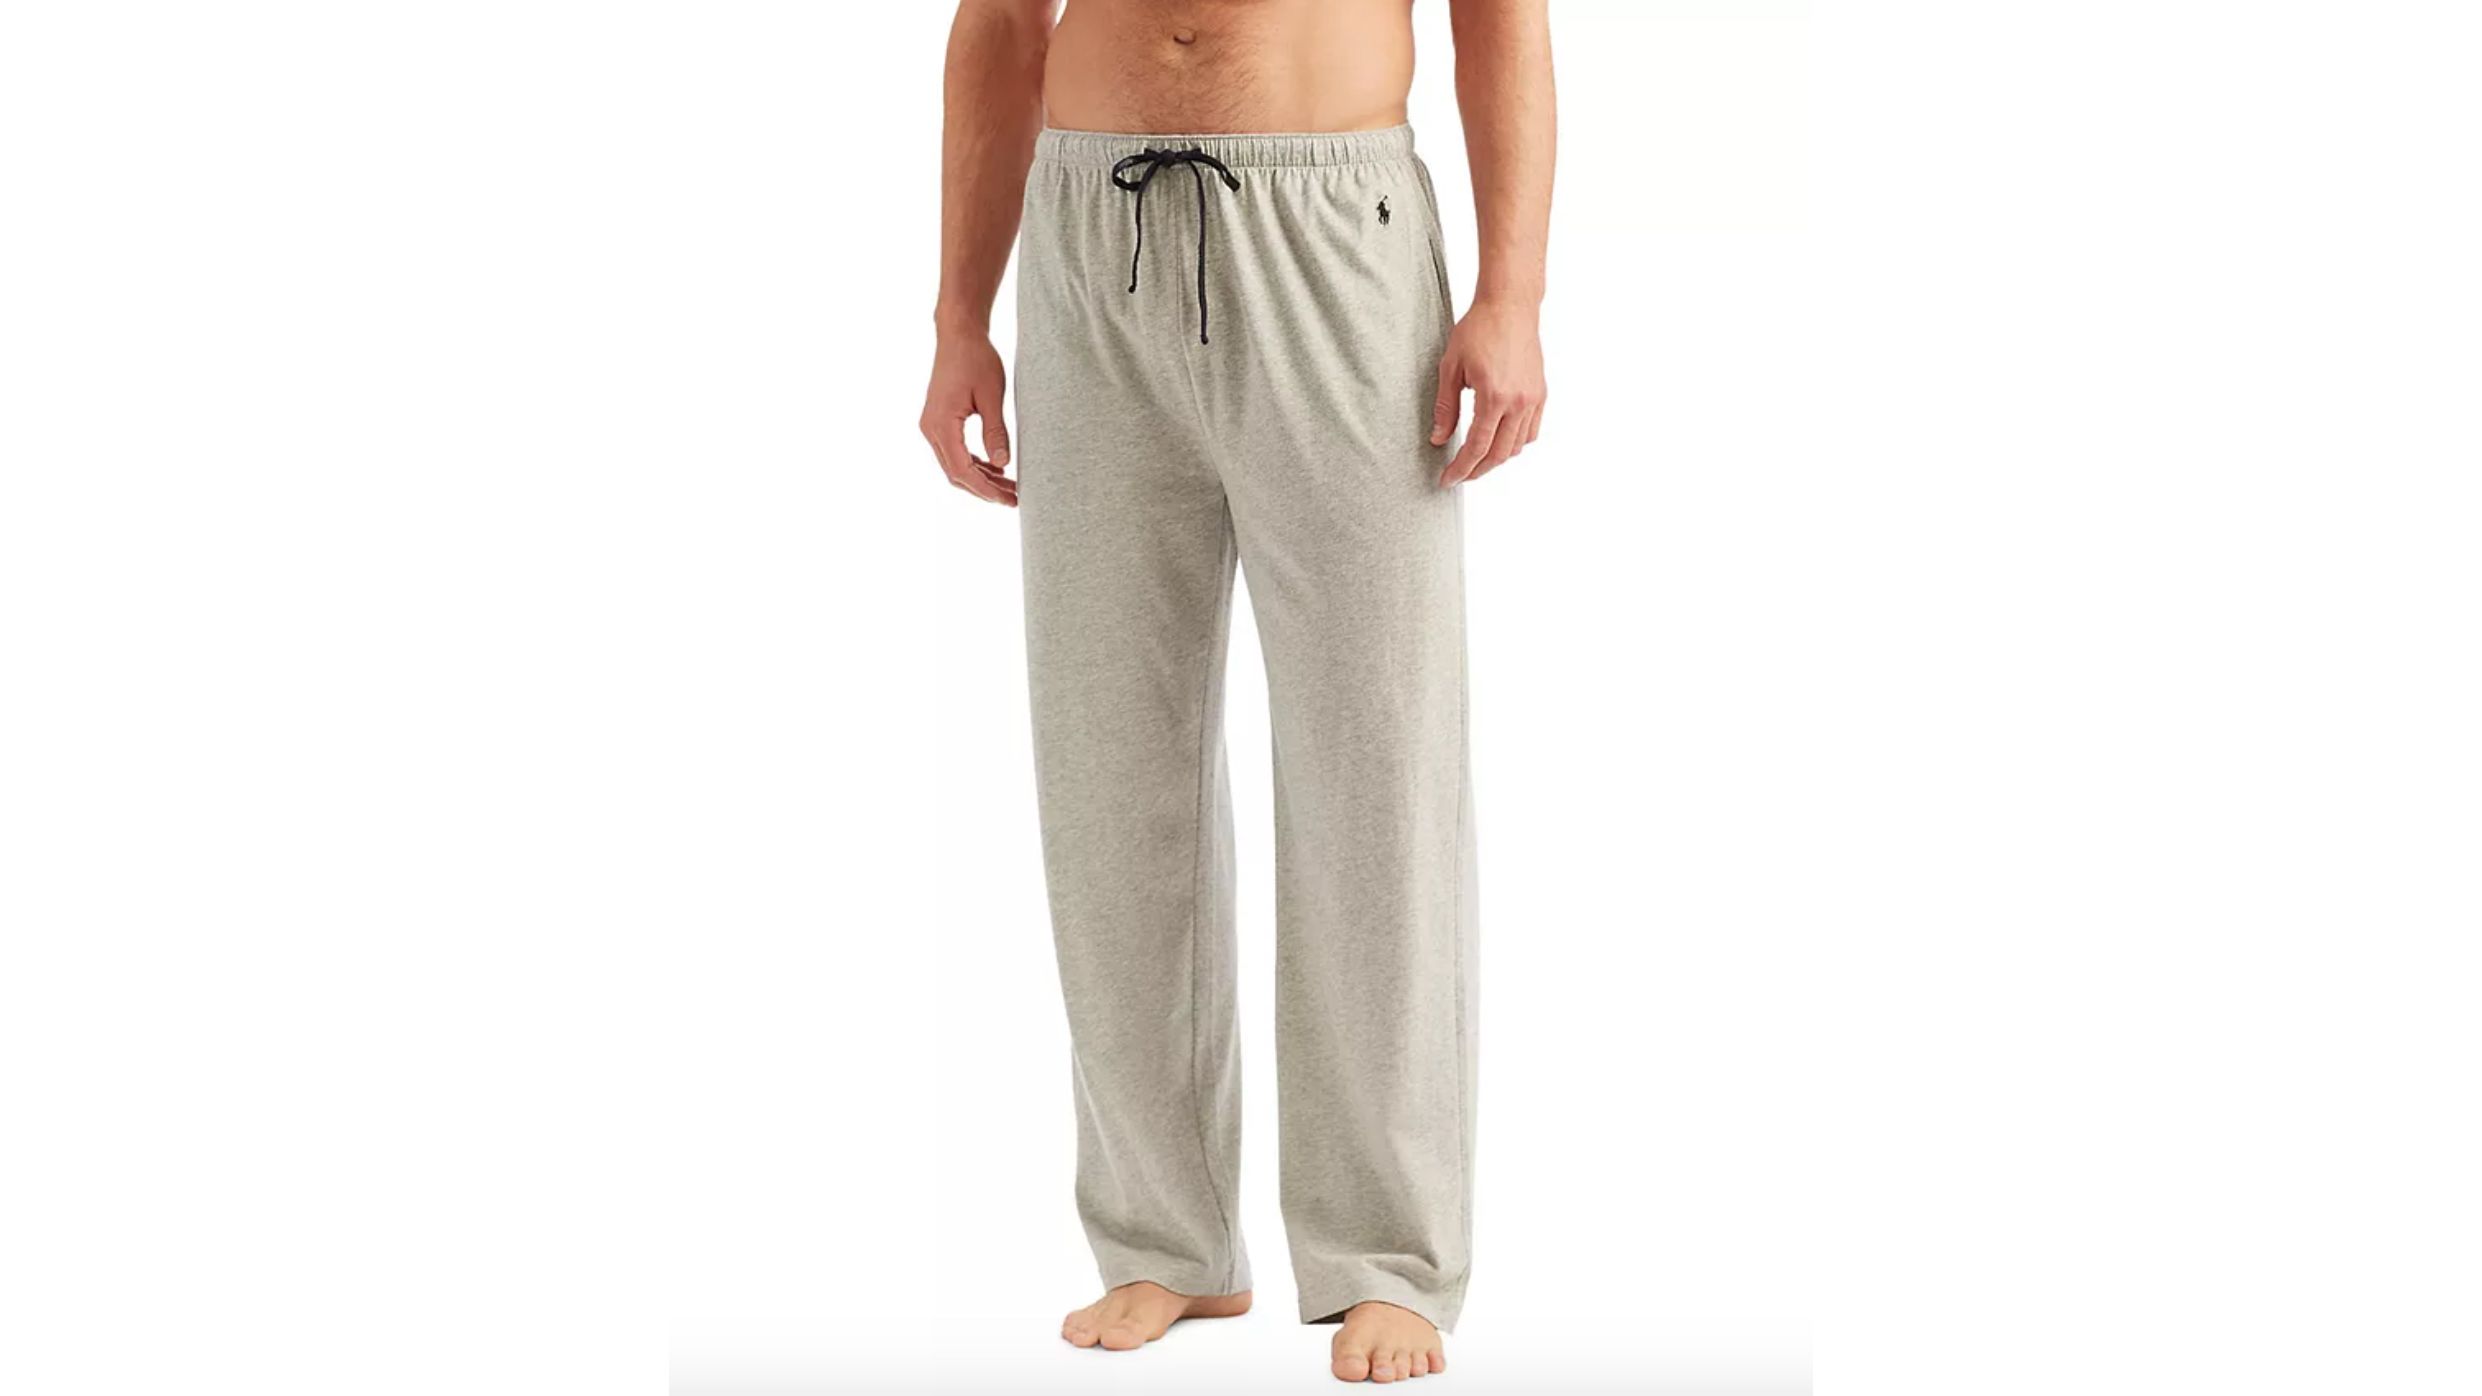 Best lounge pants, according to experts | CNN Underscored